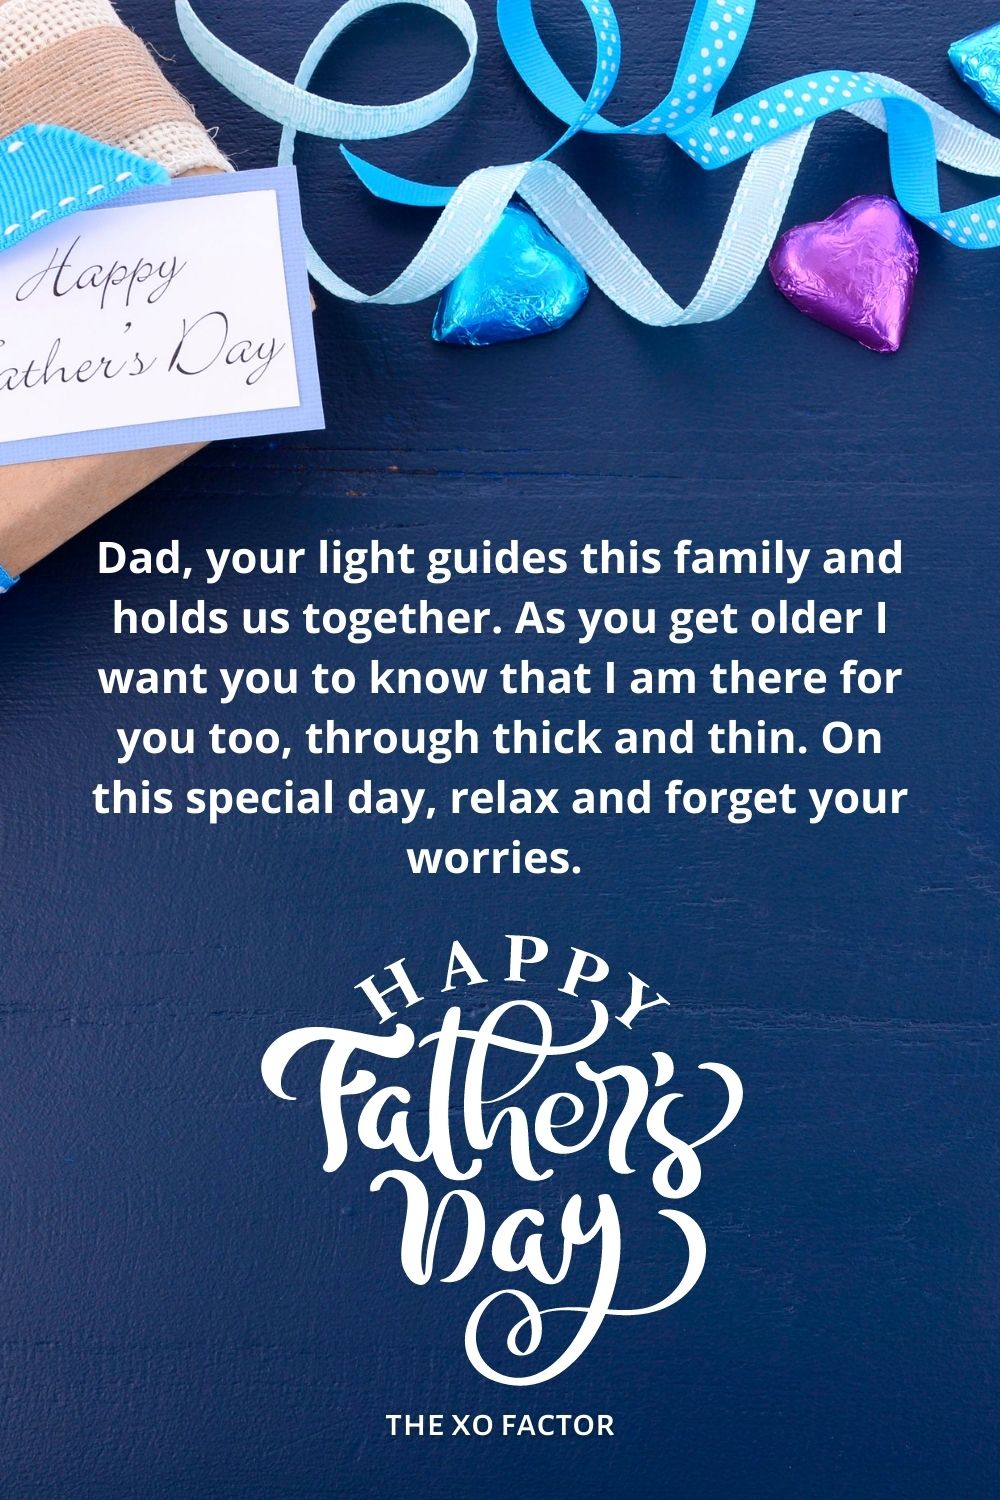 Dad, your light guides this family and holds us together. As you get older I want you to know that I am there for you too, through thick and thin. On this special day, relax and forget your worries. Happy father’s day!